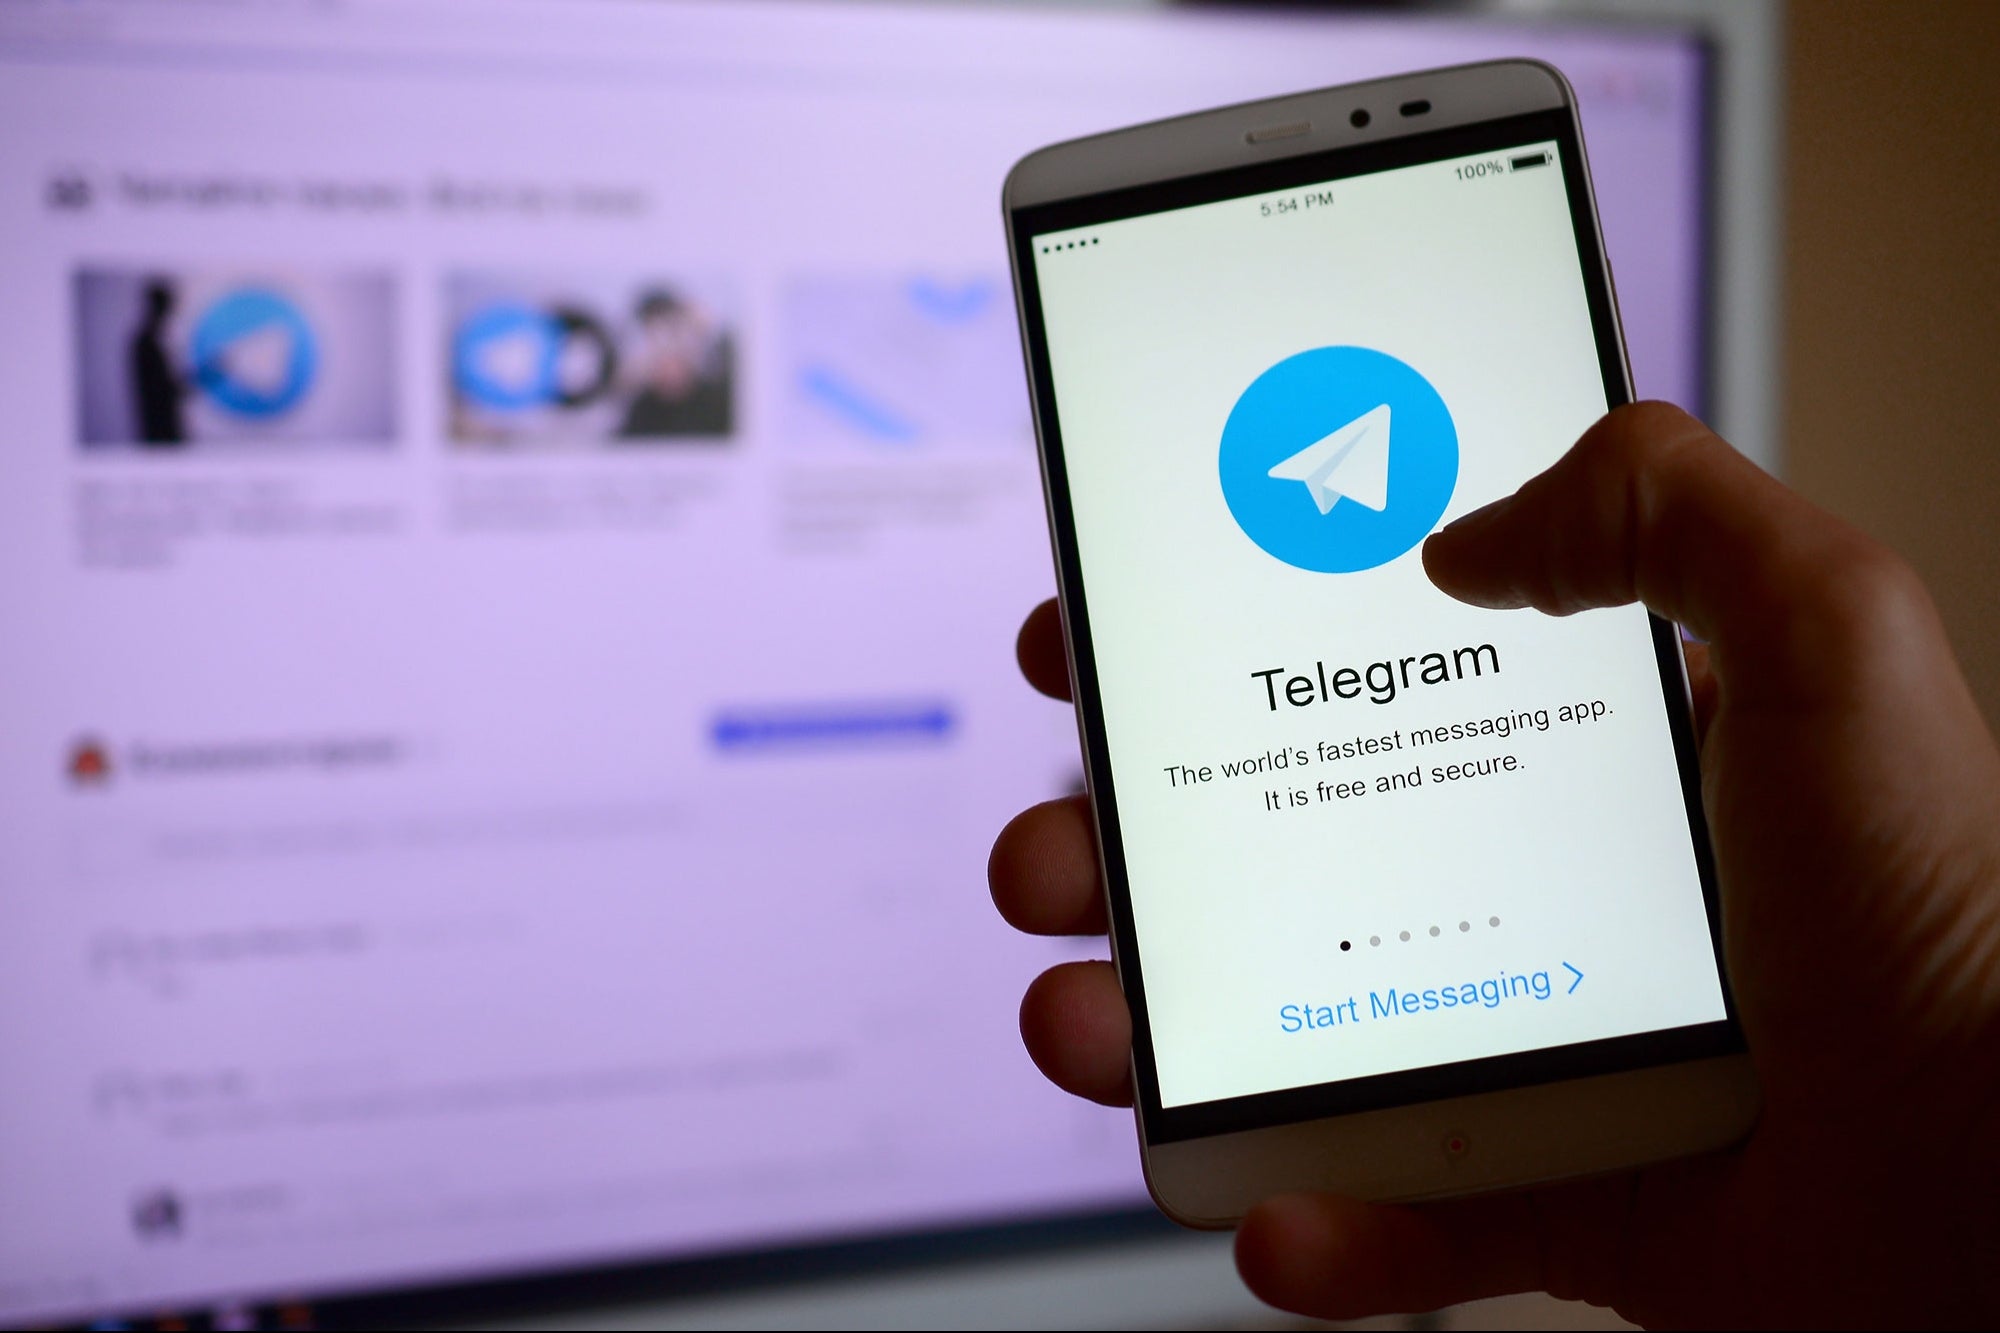 Telegram manages to raise more than a billion dollars in bonds to finance its growth